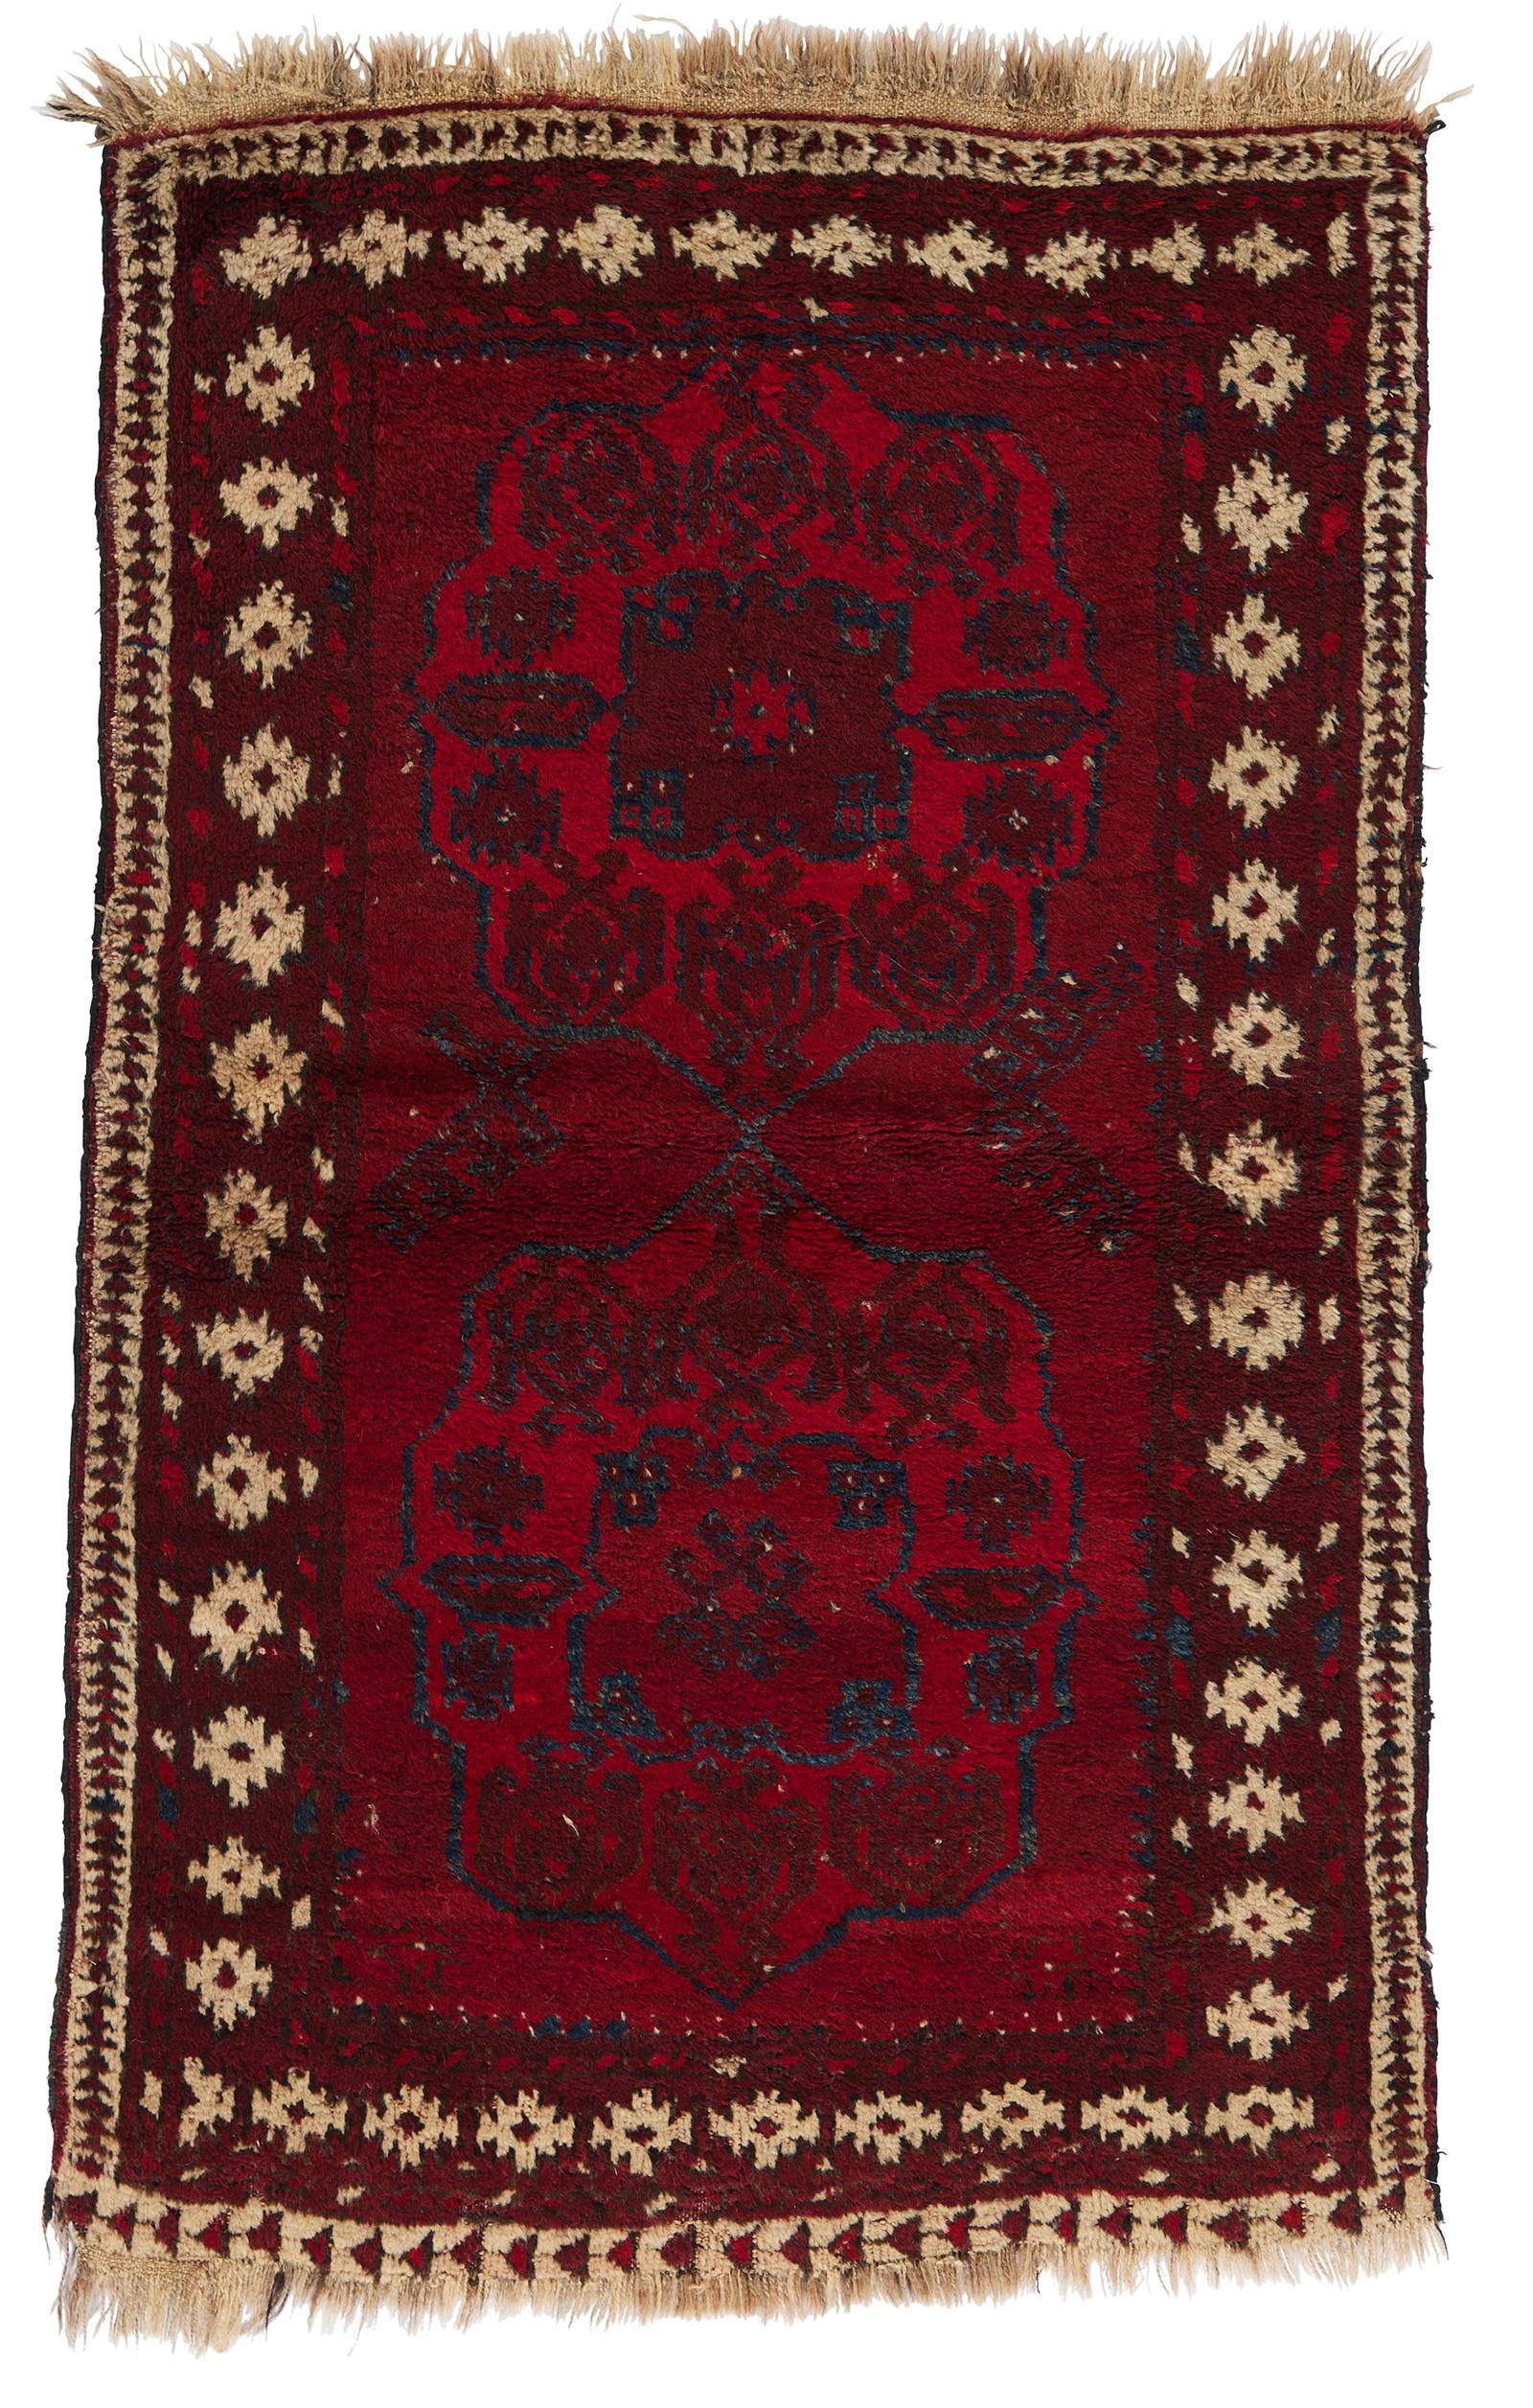 This one-of-a-kind ANTIQUE AFGHANI 3' X 5' rug was hand-woven of 100% wool in Afghanistan over 100 years ago. It has a double border in beige and floral motifs in the field, in red and black. Its excellent quality and great condition make it a